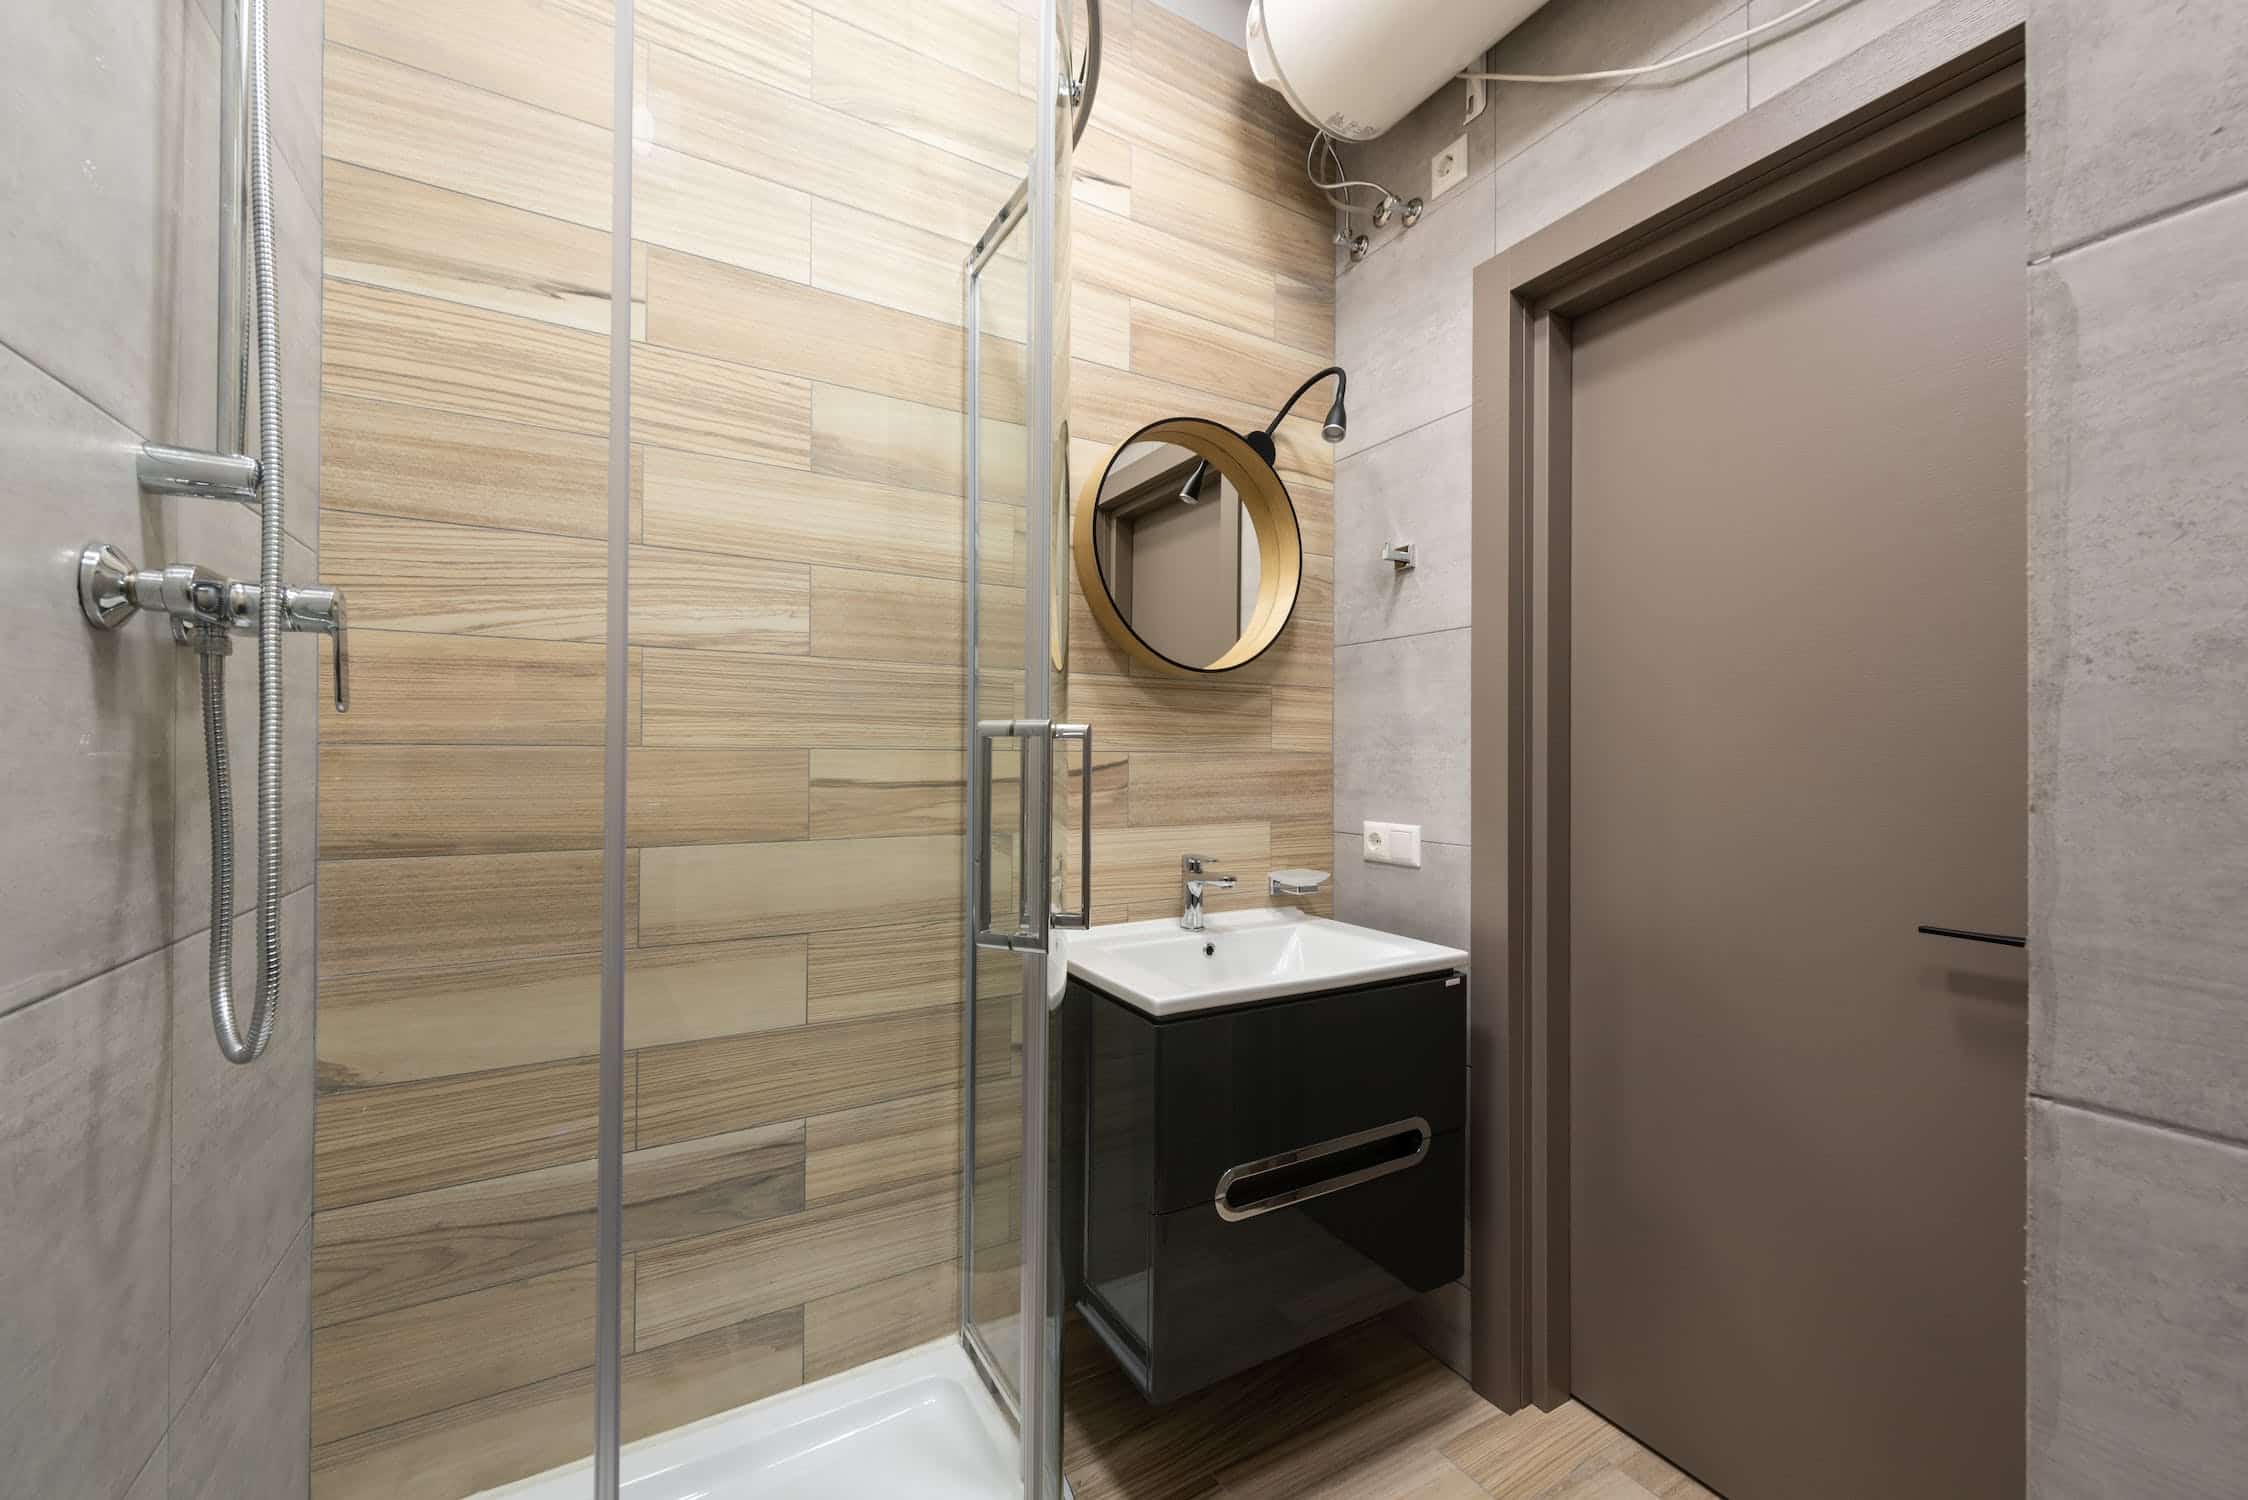 compact bathroom with built-in vanity, mirror, wall sconce, glass door, shower cubicle